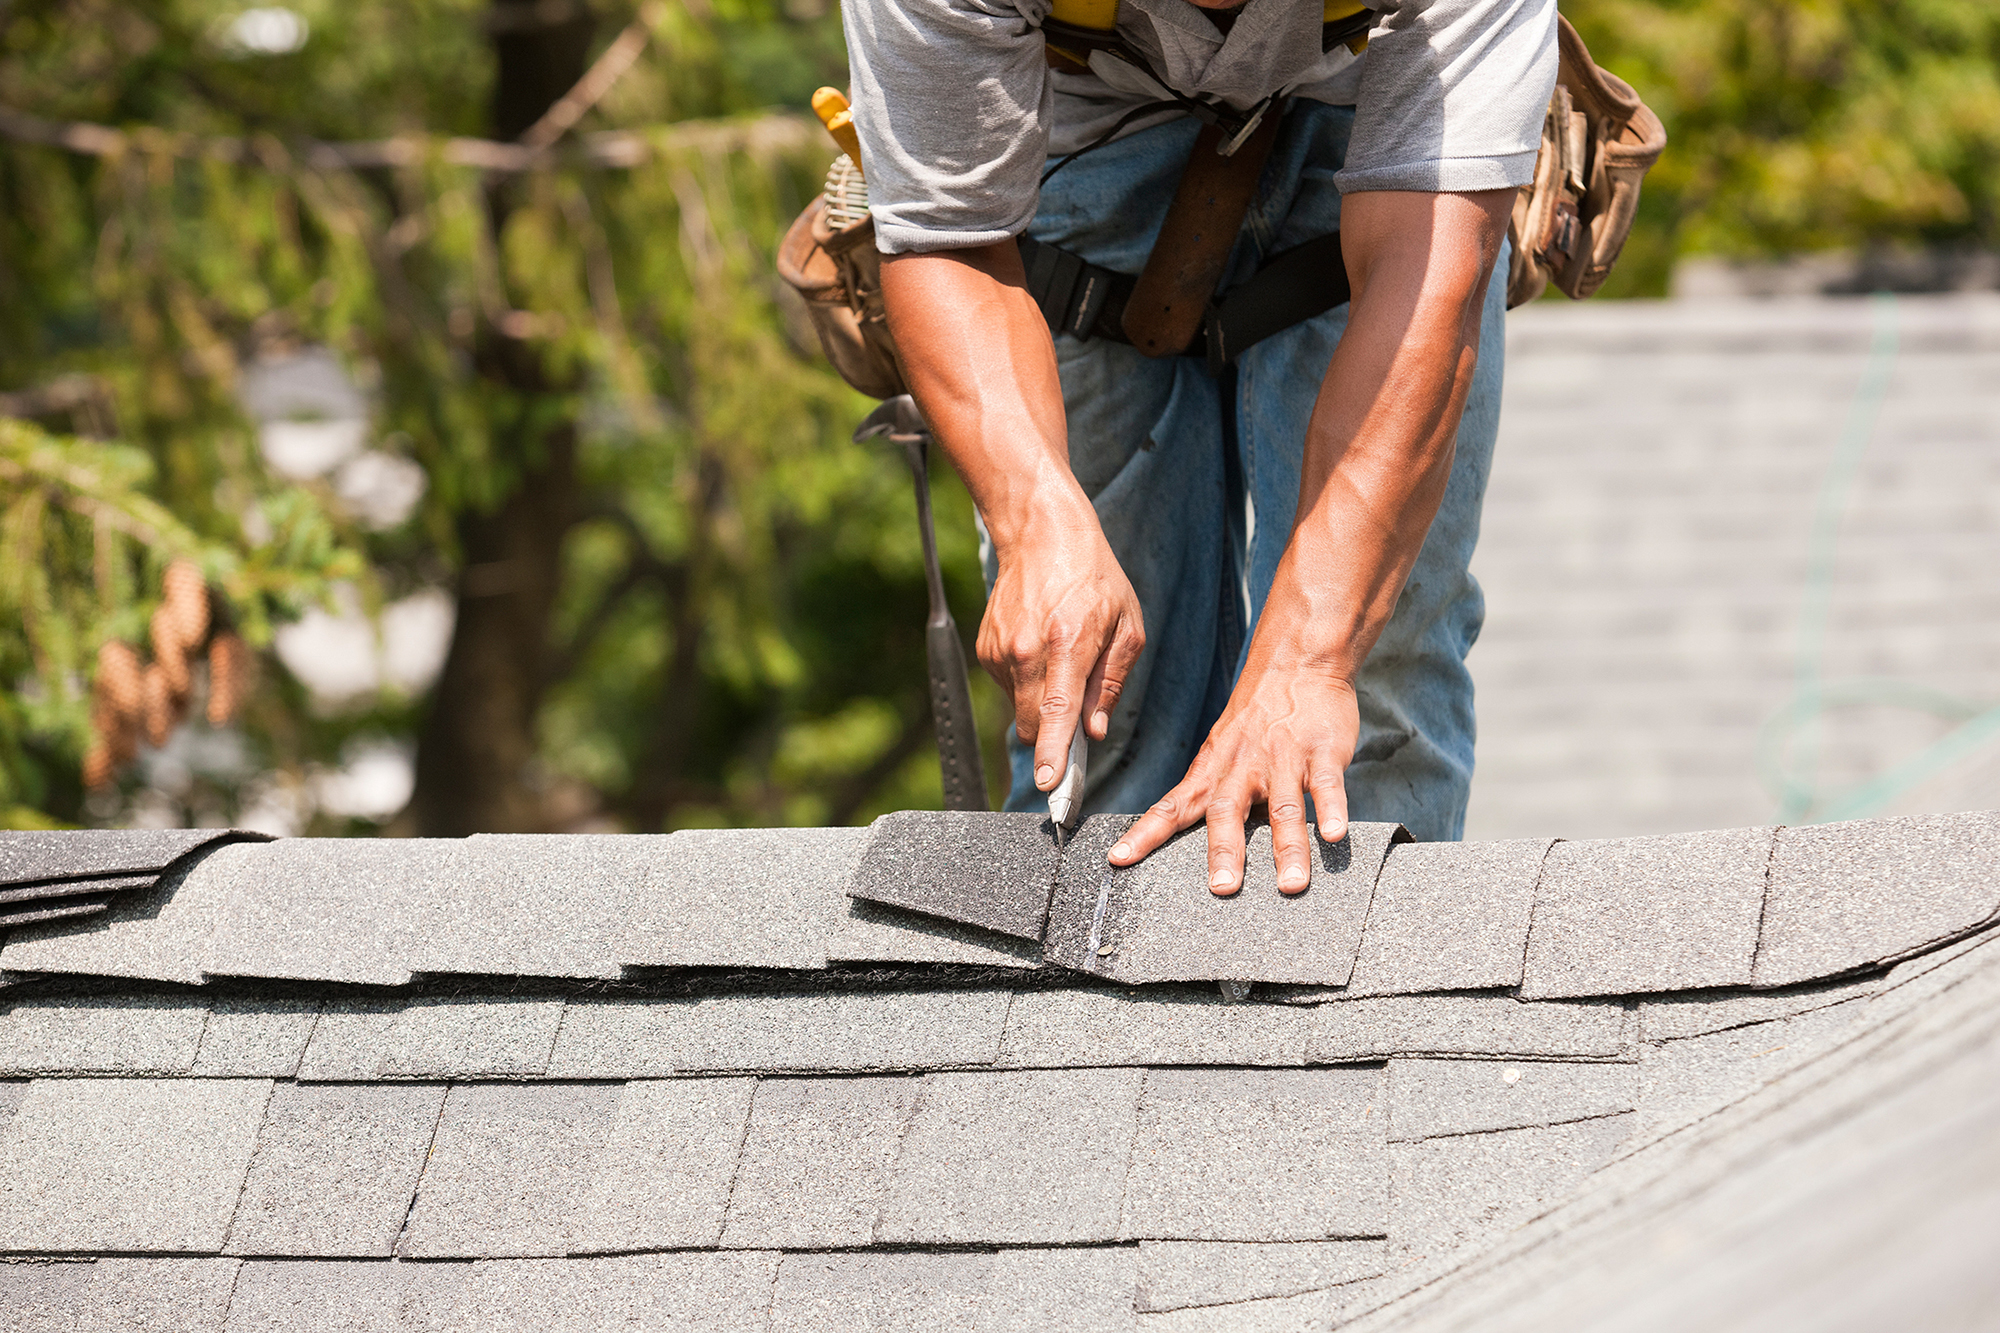 Roof replacement - roofer cutting a shingle